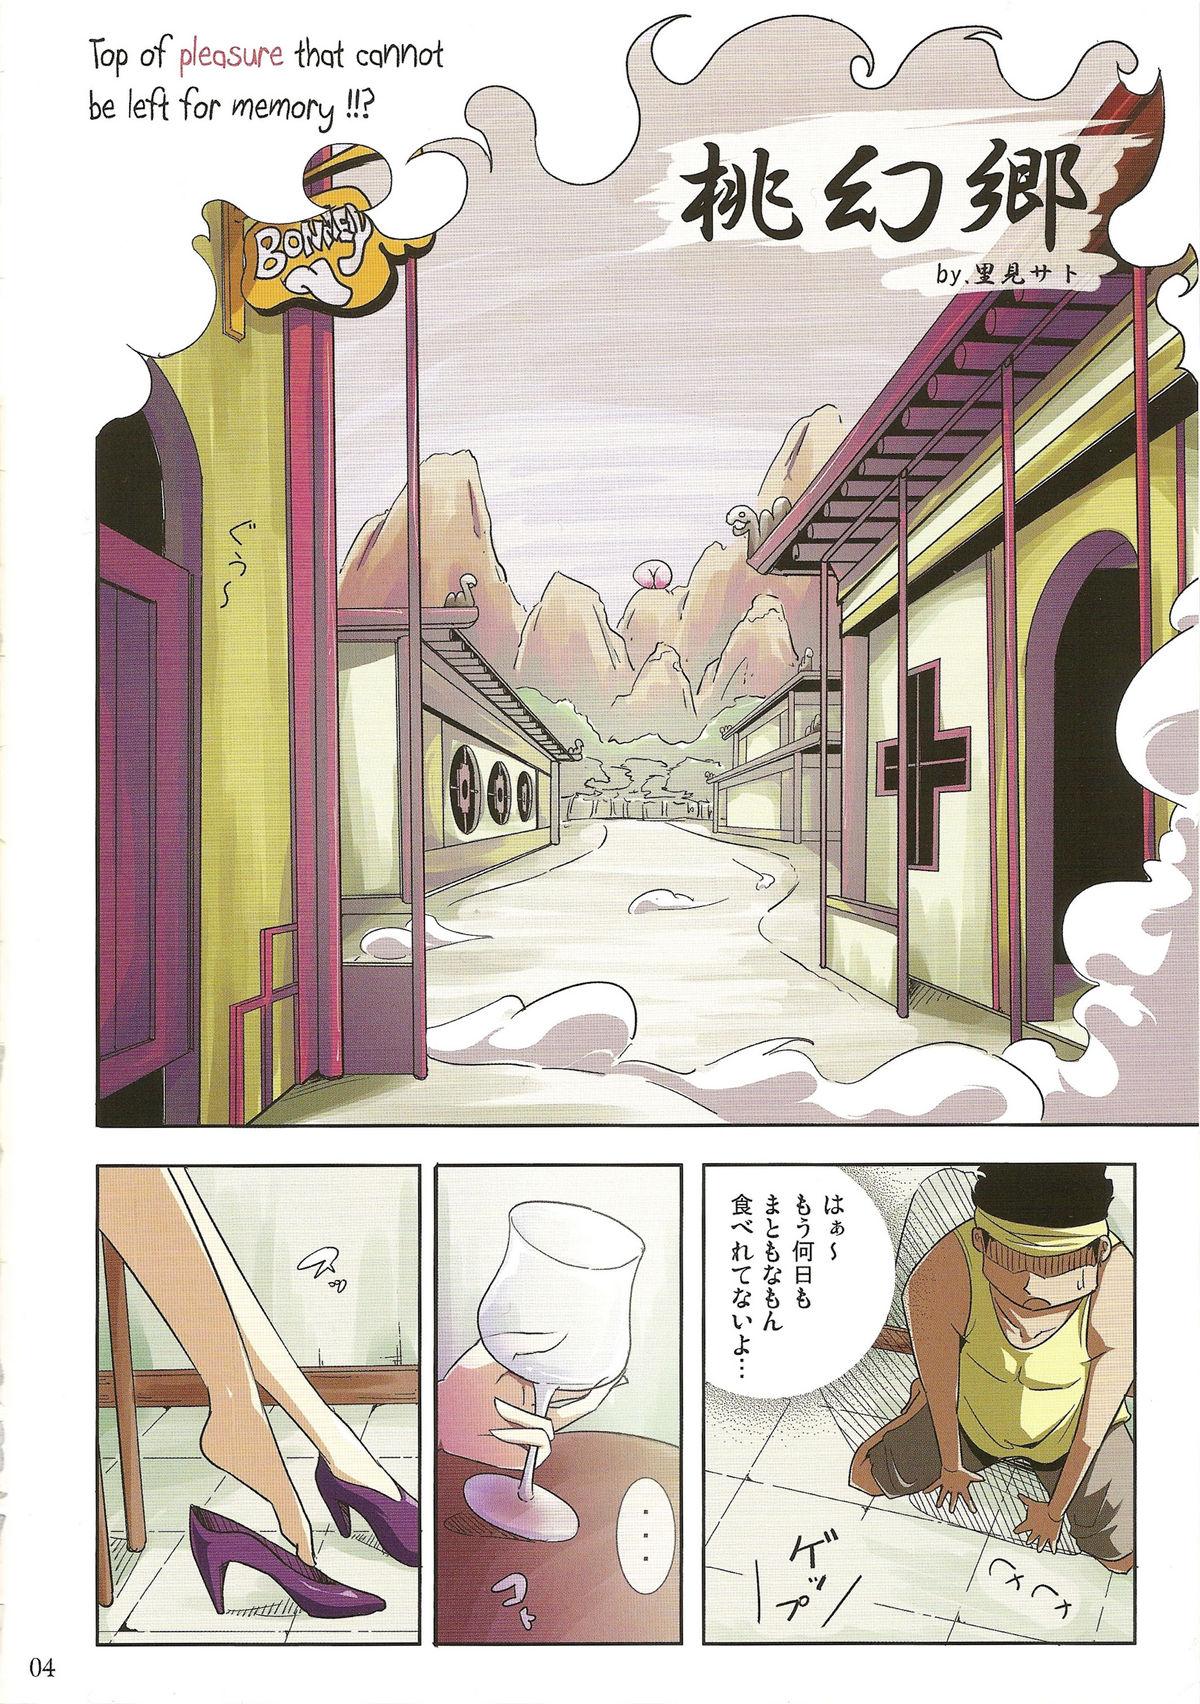 Female Tougenkyou - One piece Salope - Page 4